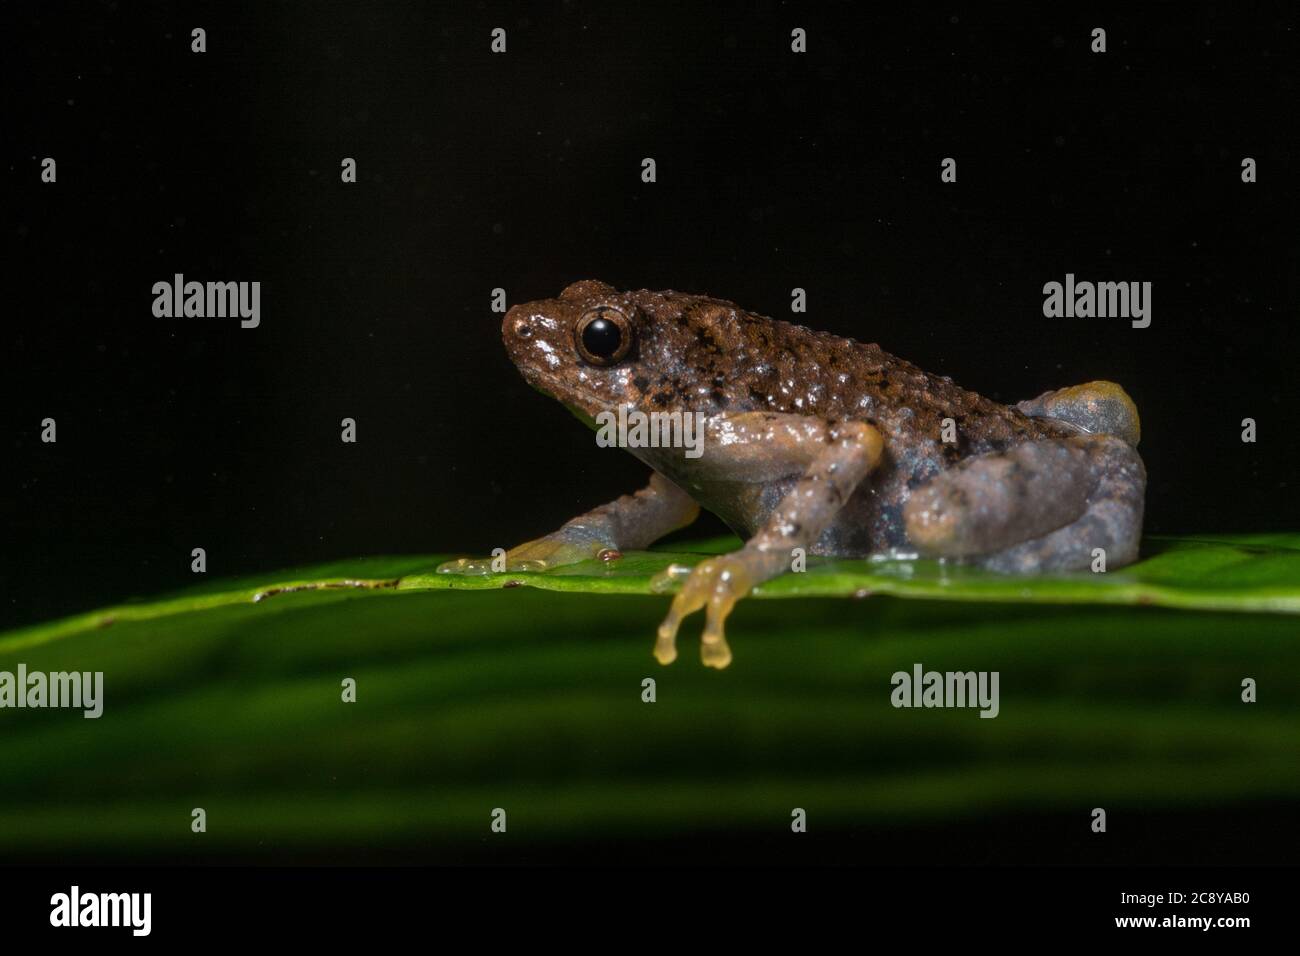 The borneo tree hole frog (Metaphrynella sundana) a small microhylid endemic to the rainforests in Borneo. Stock Photo